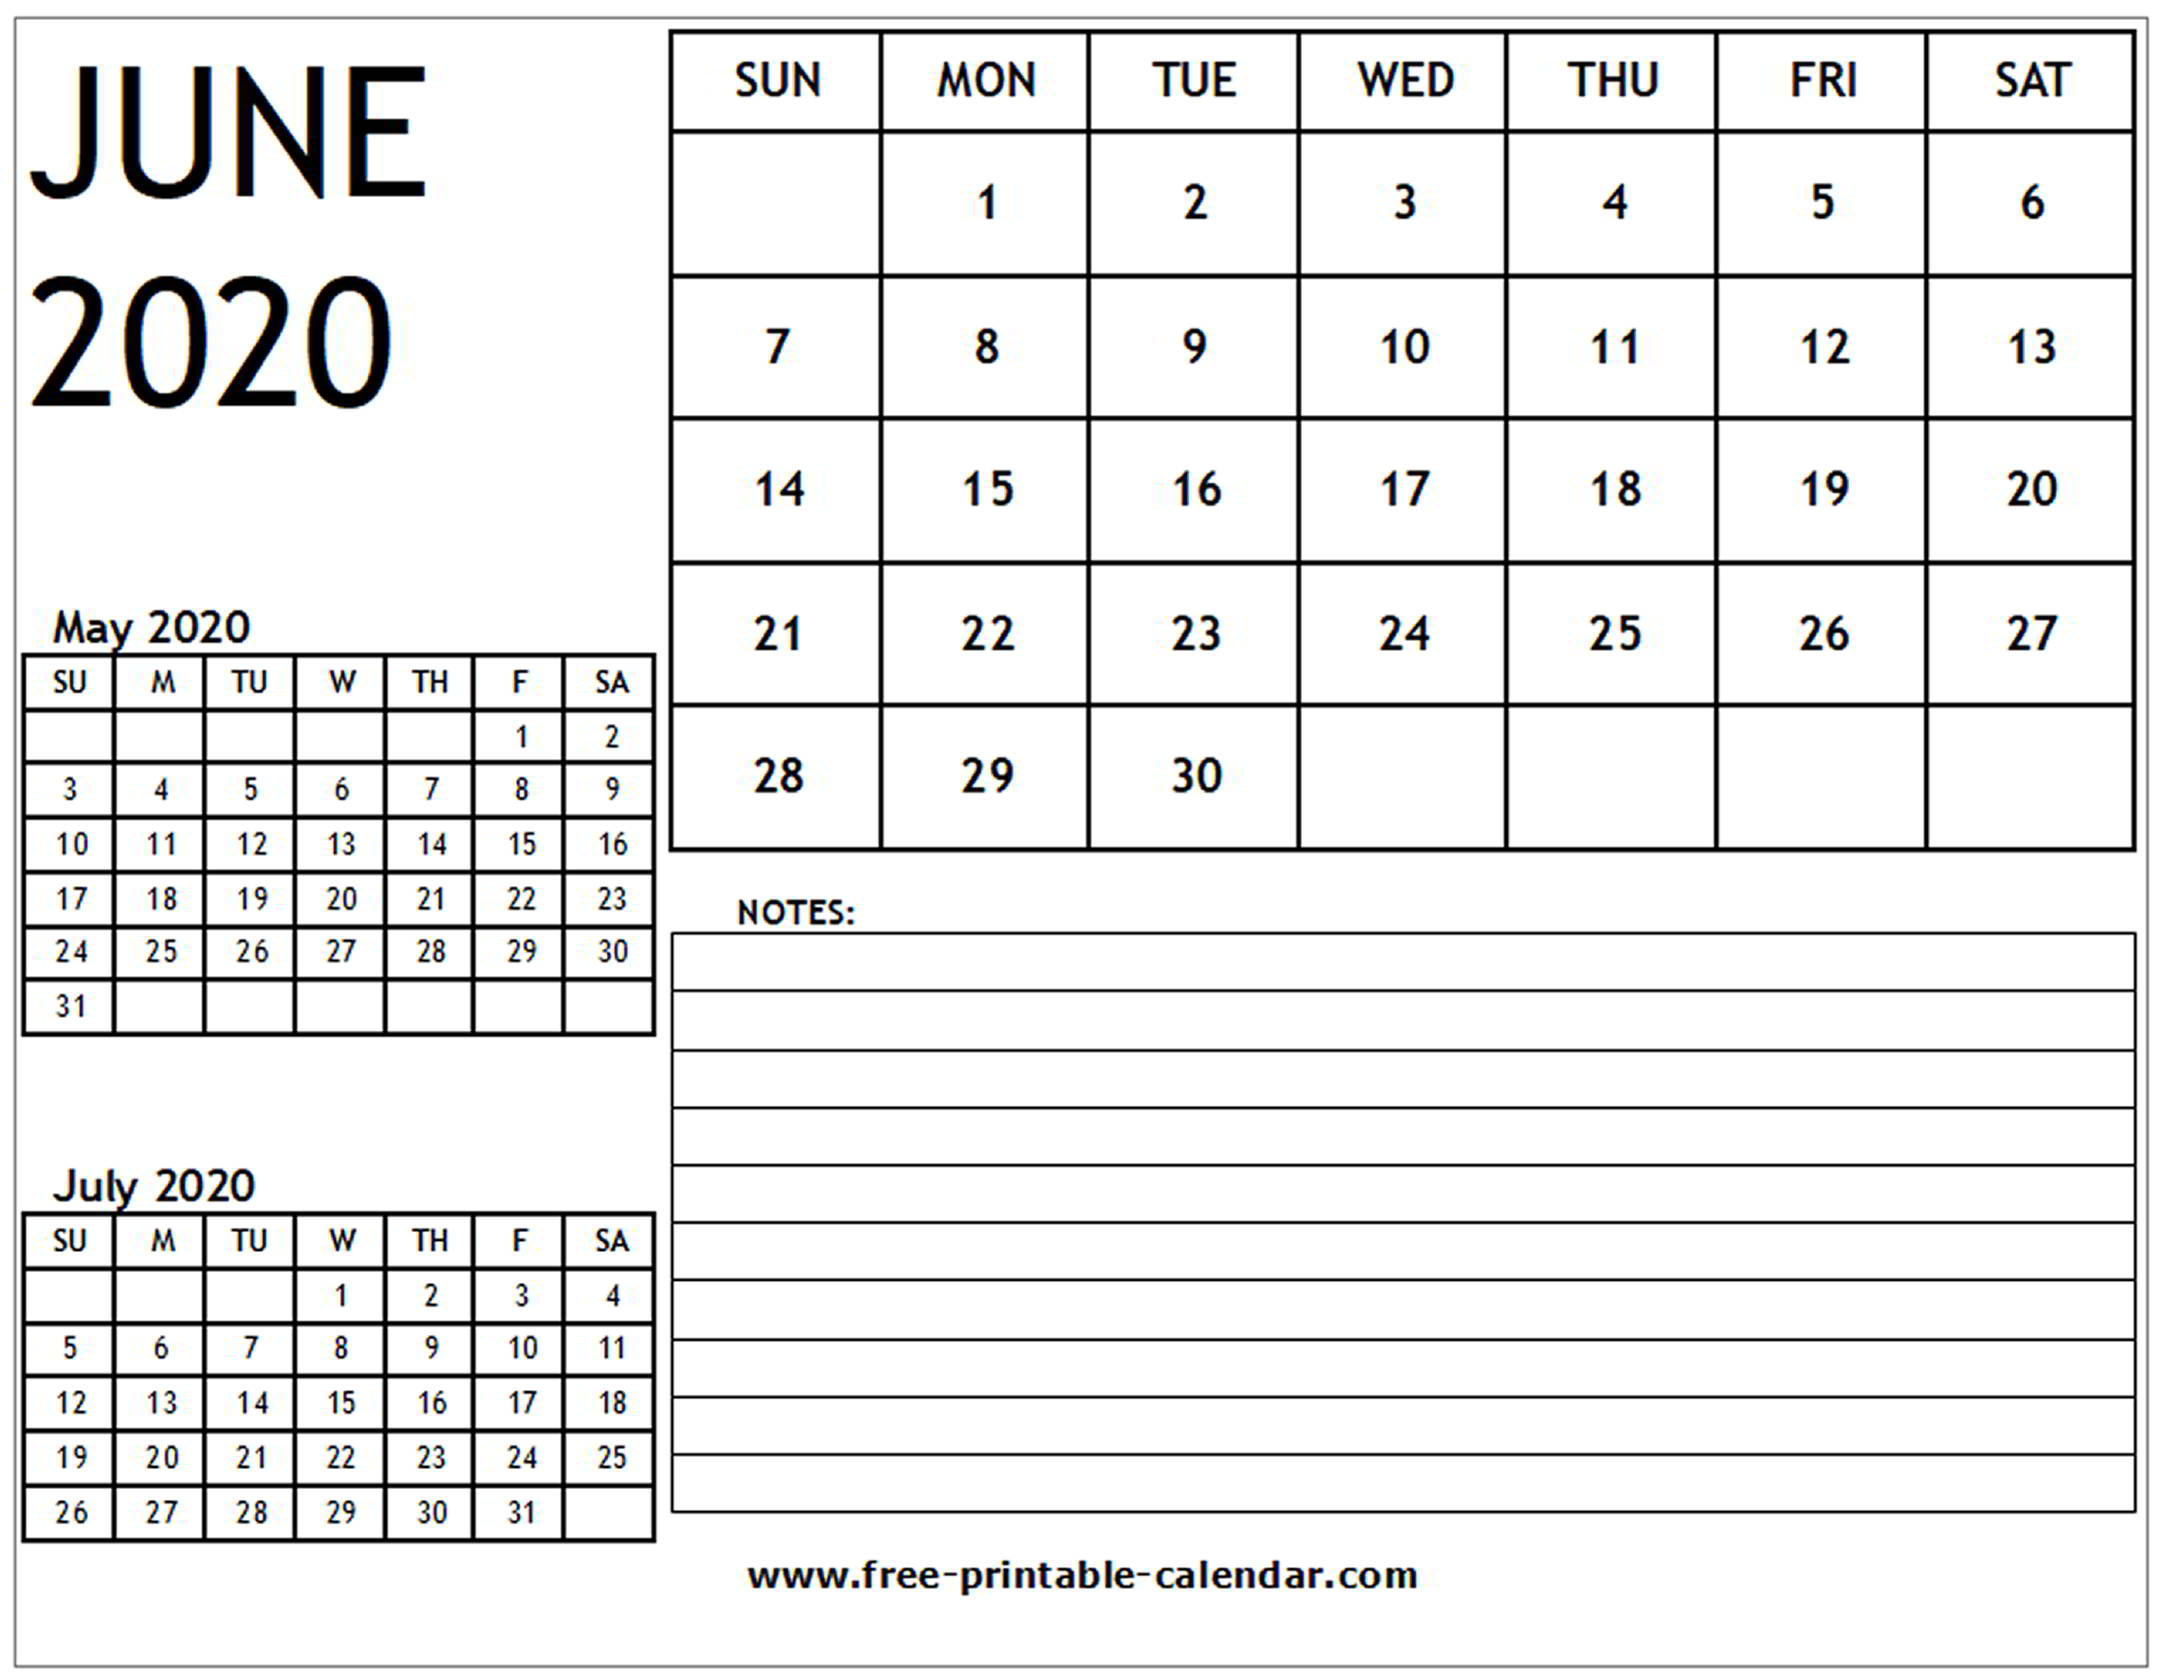 Fillable Calendar For June 2020 with Notes